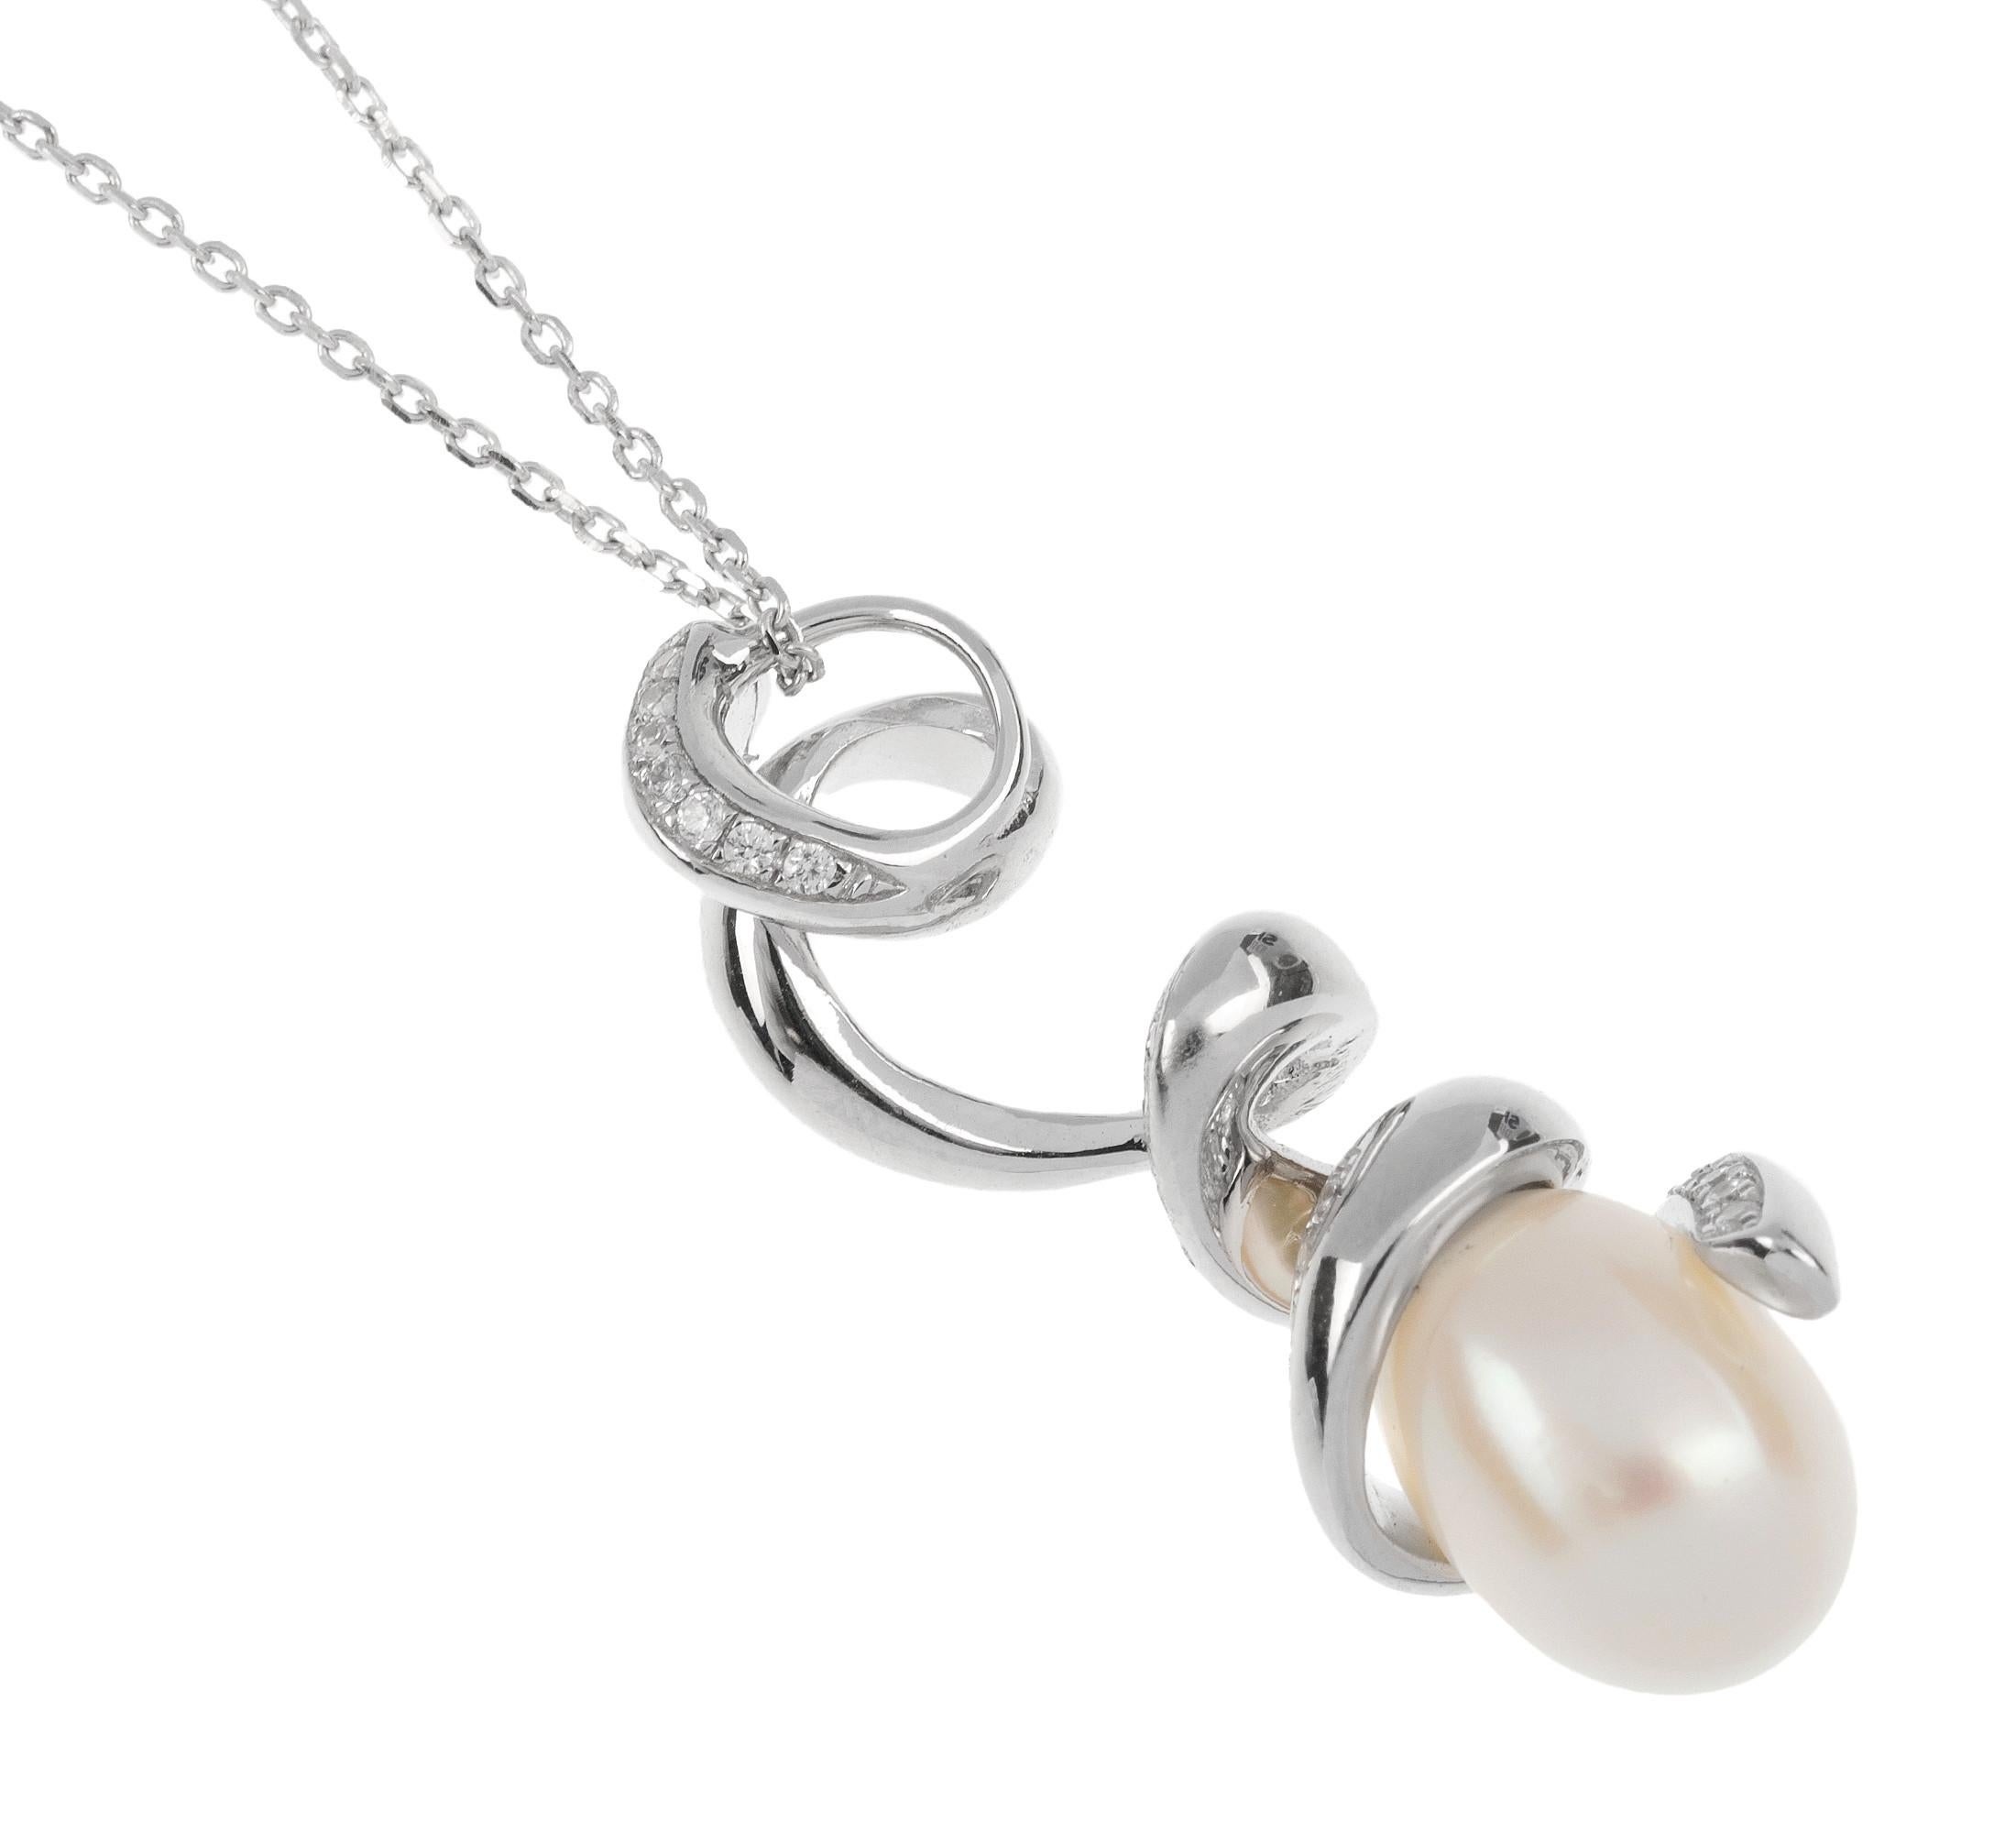 From British designer Fei Liu, a contemporary sterling silver and freshwater pearl pendant.

Pirouette

The curves and flow of this silver collection emulate the graceful movements of rhythmic gymnastics, as the choreography becomes one in harmony